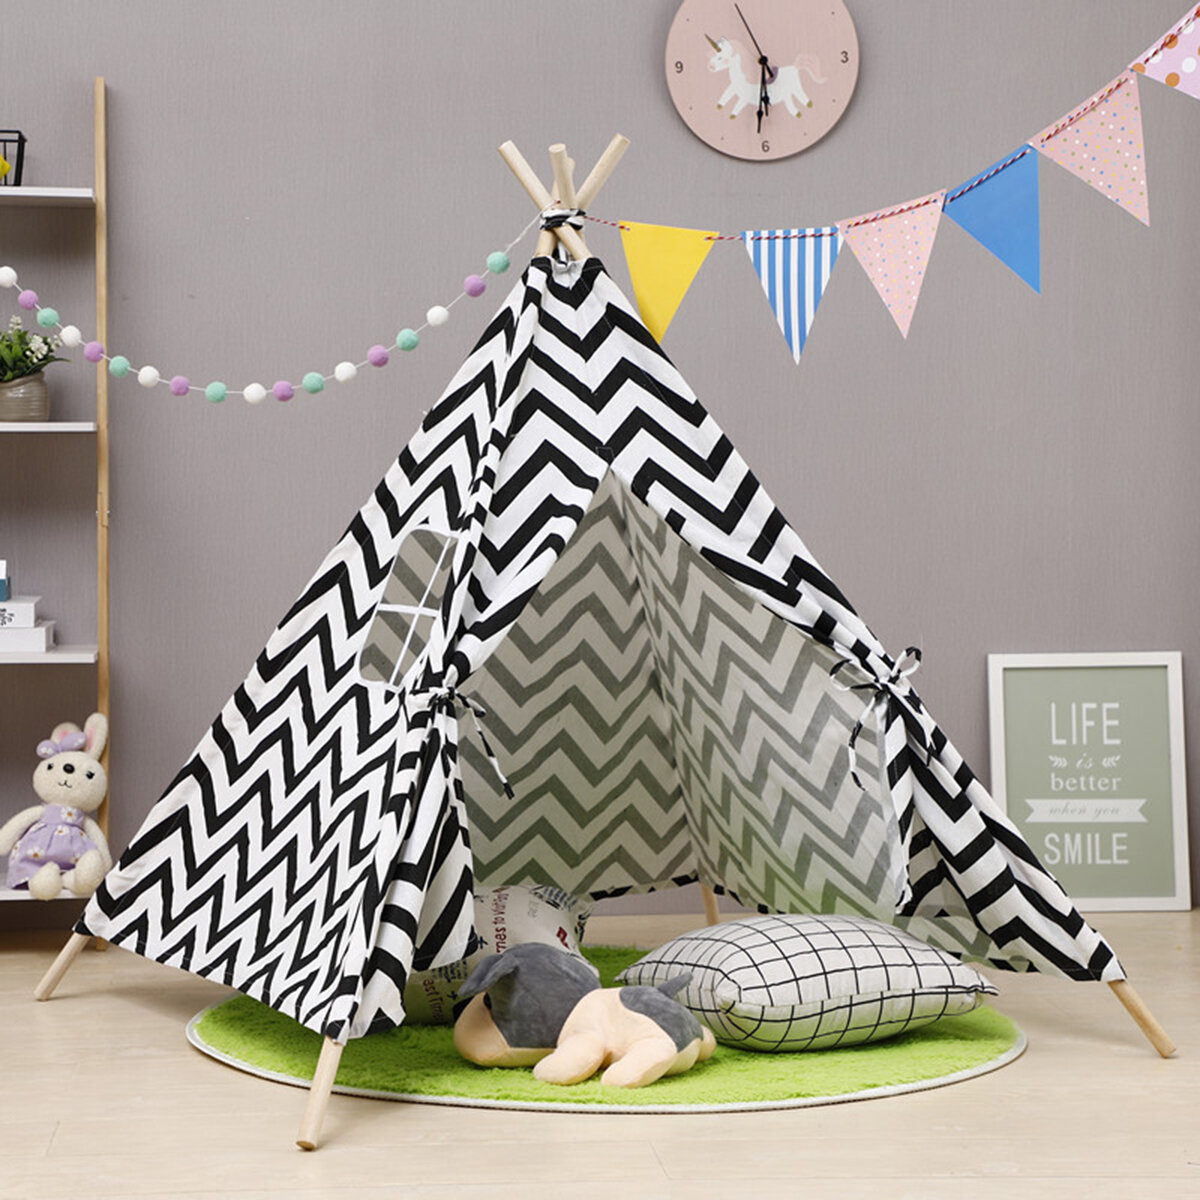 1.6M/1.8M Kids Teepee Play Tent Pretend Playhouse Indoor Outdoor Children Toddler Indian Canvas Playhouse Sleeping Dome